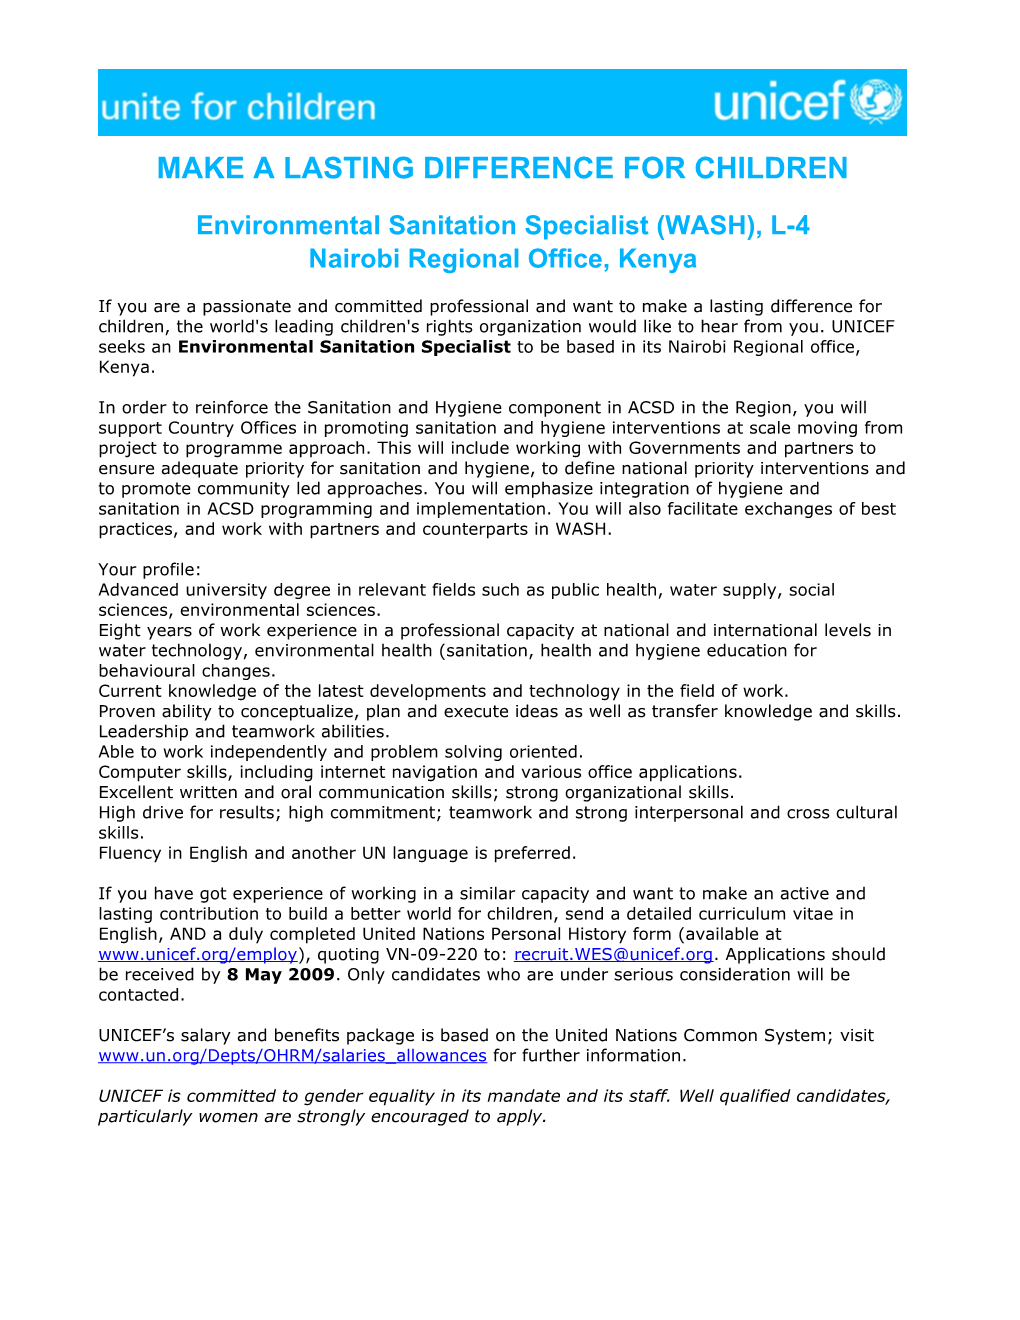 Make a Lasting Difference Forchildren